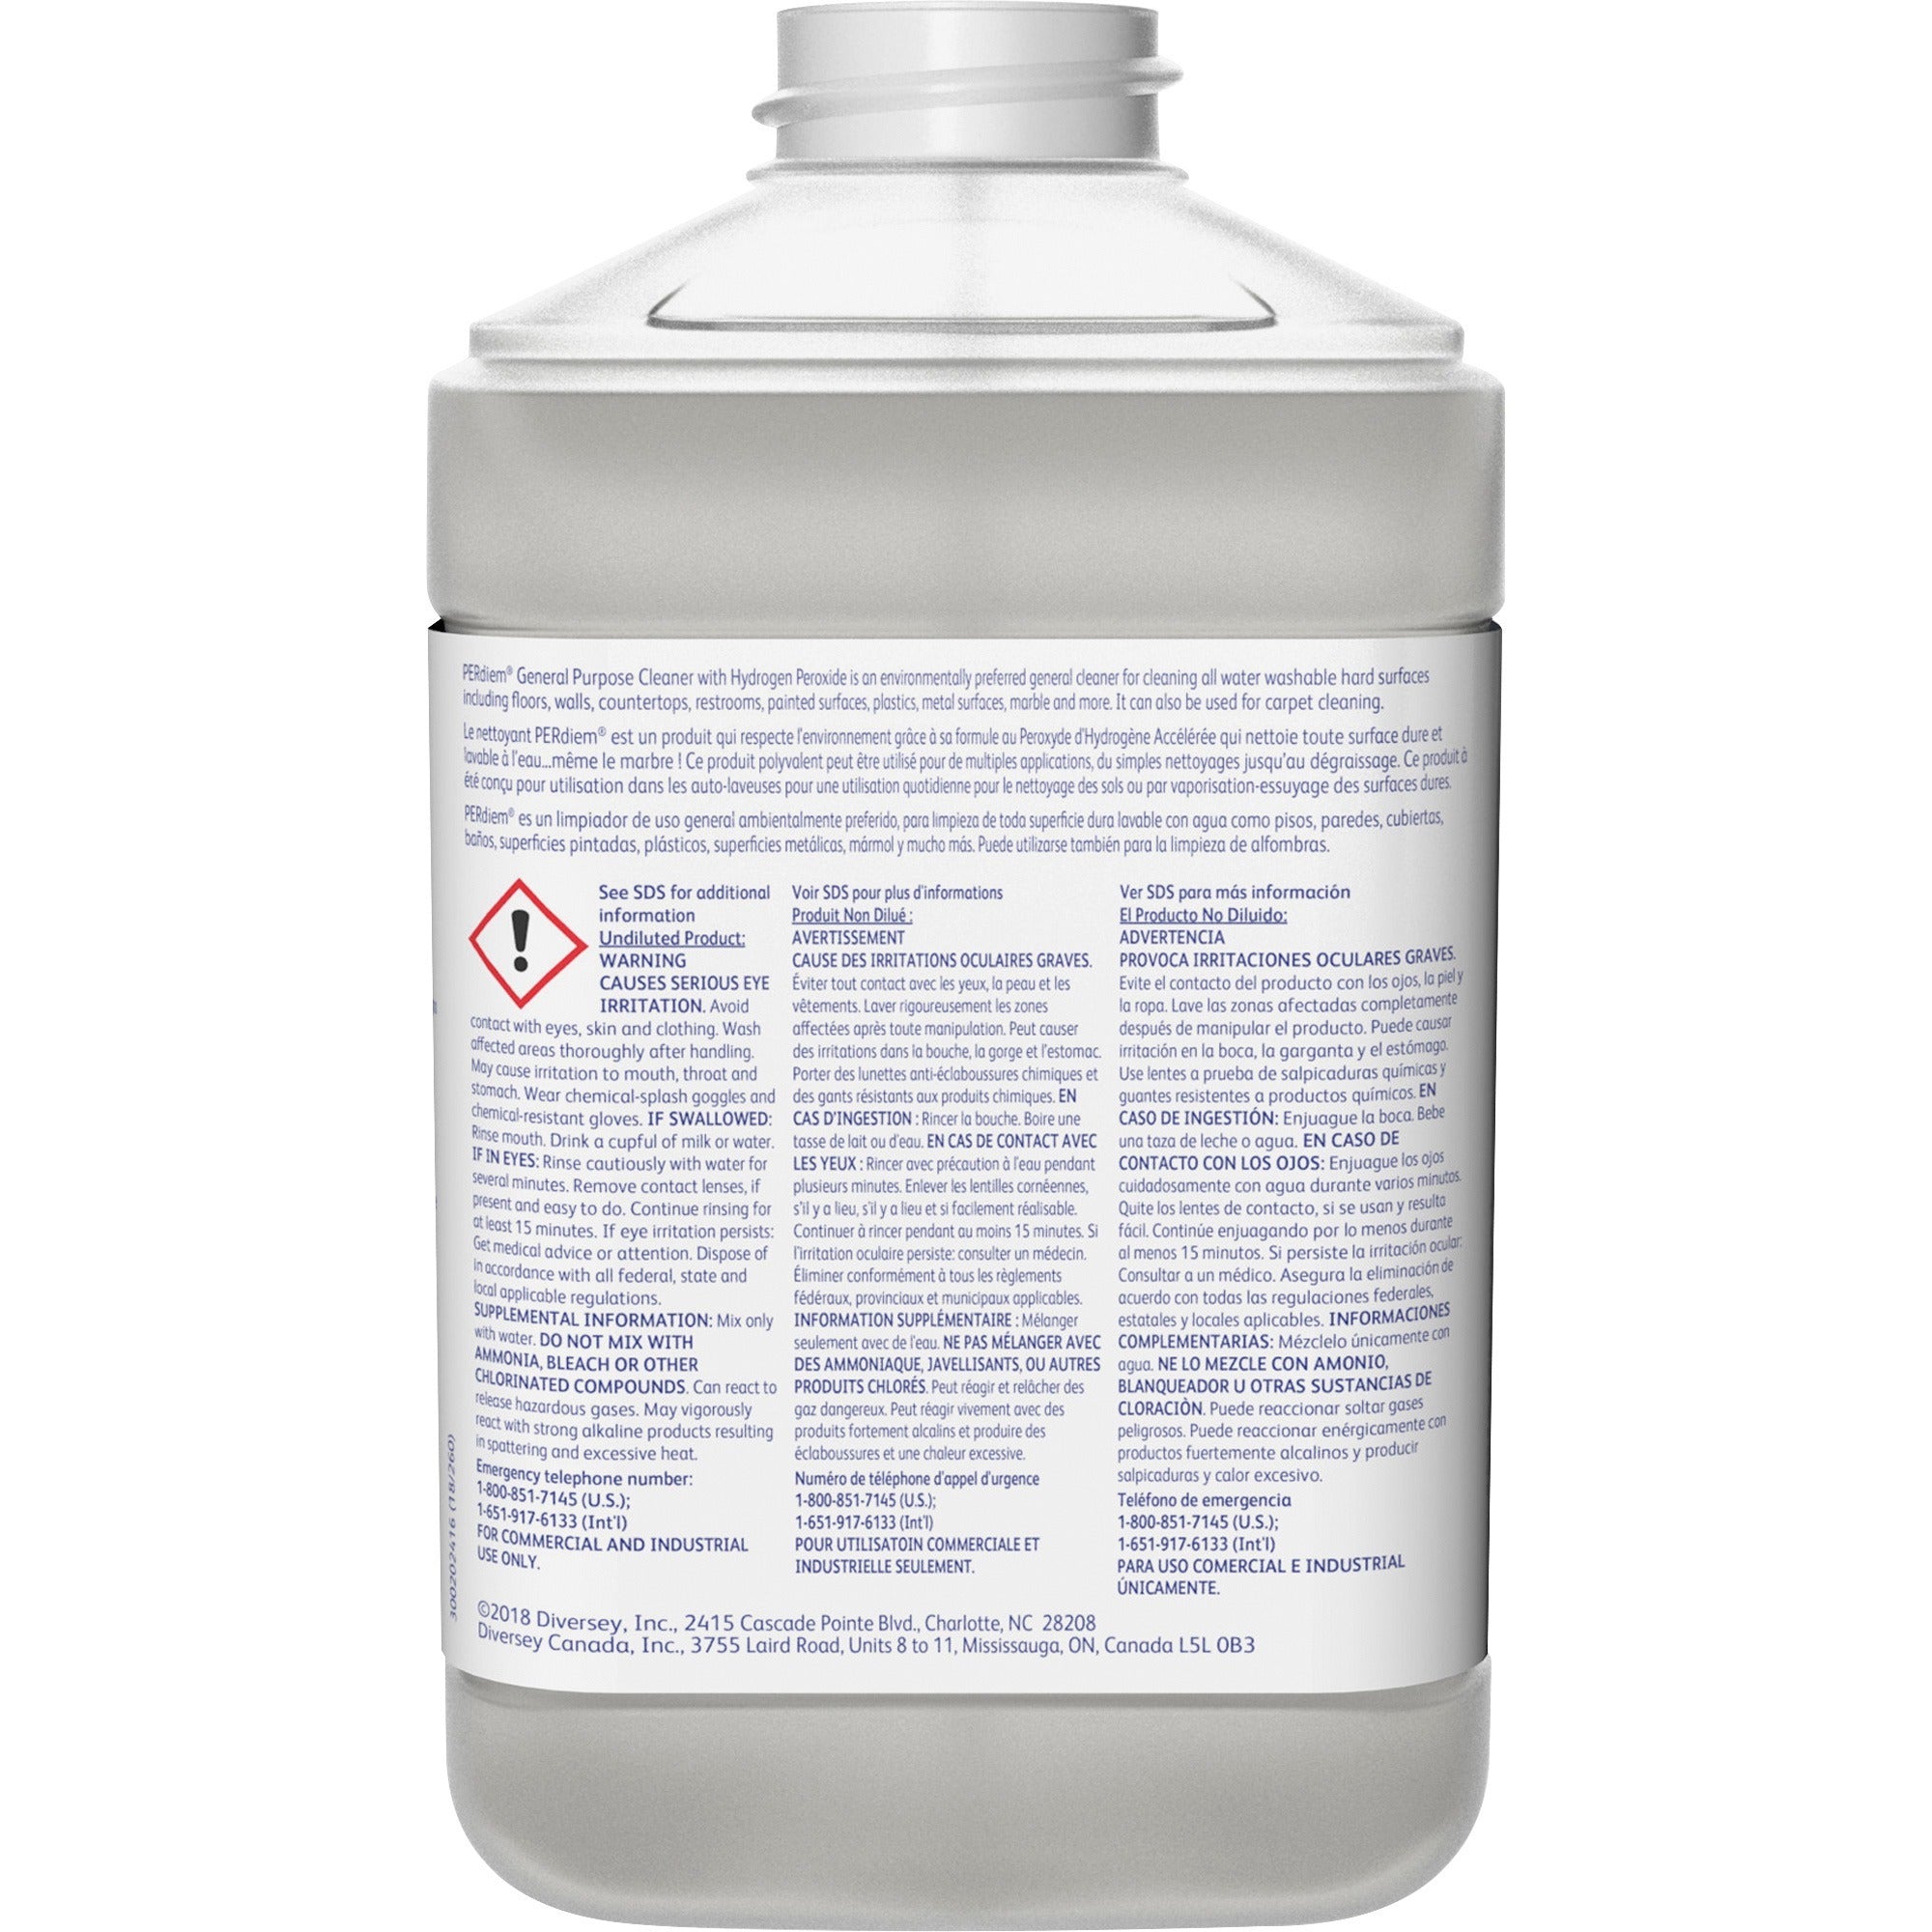 perdiem-general-purpose-cleaner-with-hydrogen-peroxide-concentrate-845-fl-oz-26-quartbottle-1-each-heavy-duty-dilutable-phosphorous-free-odorless-color-free-clear_dvo95613252 - 3